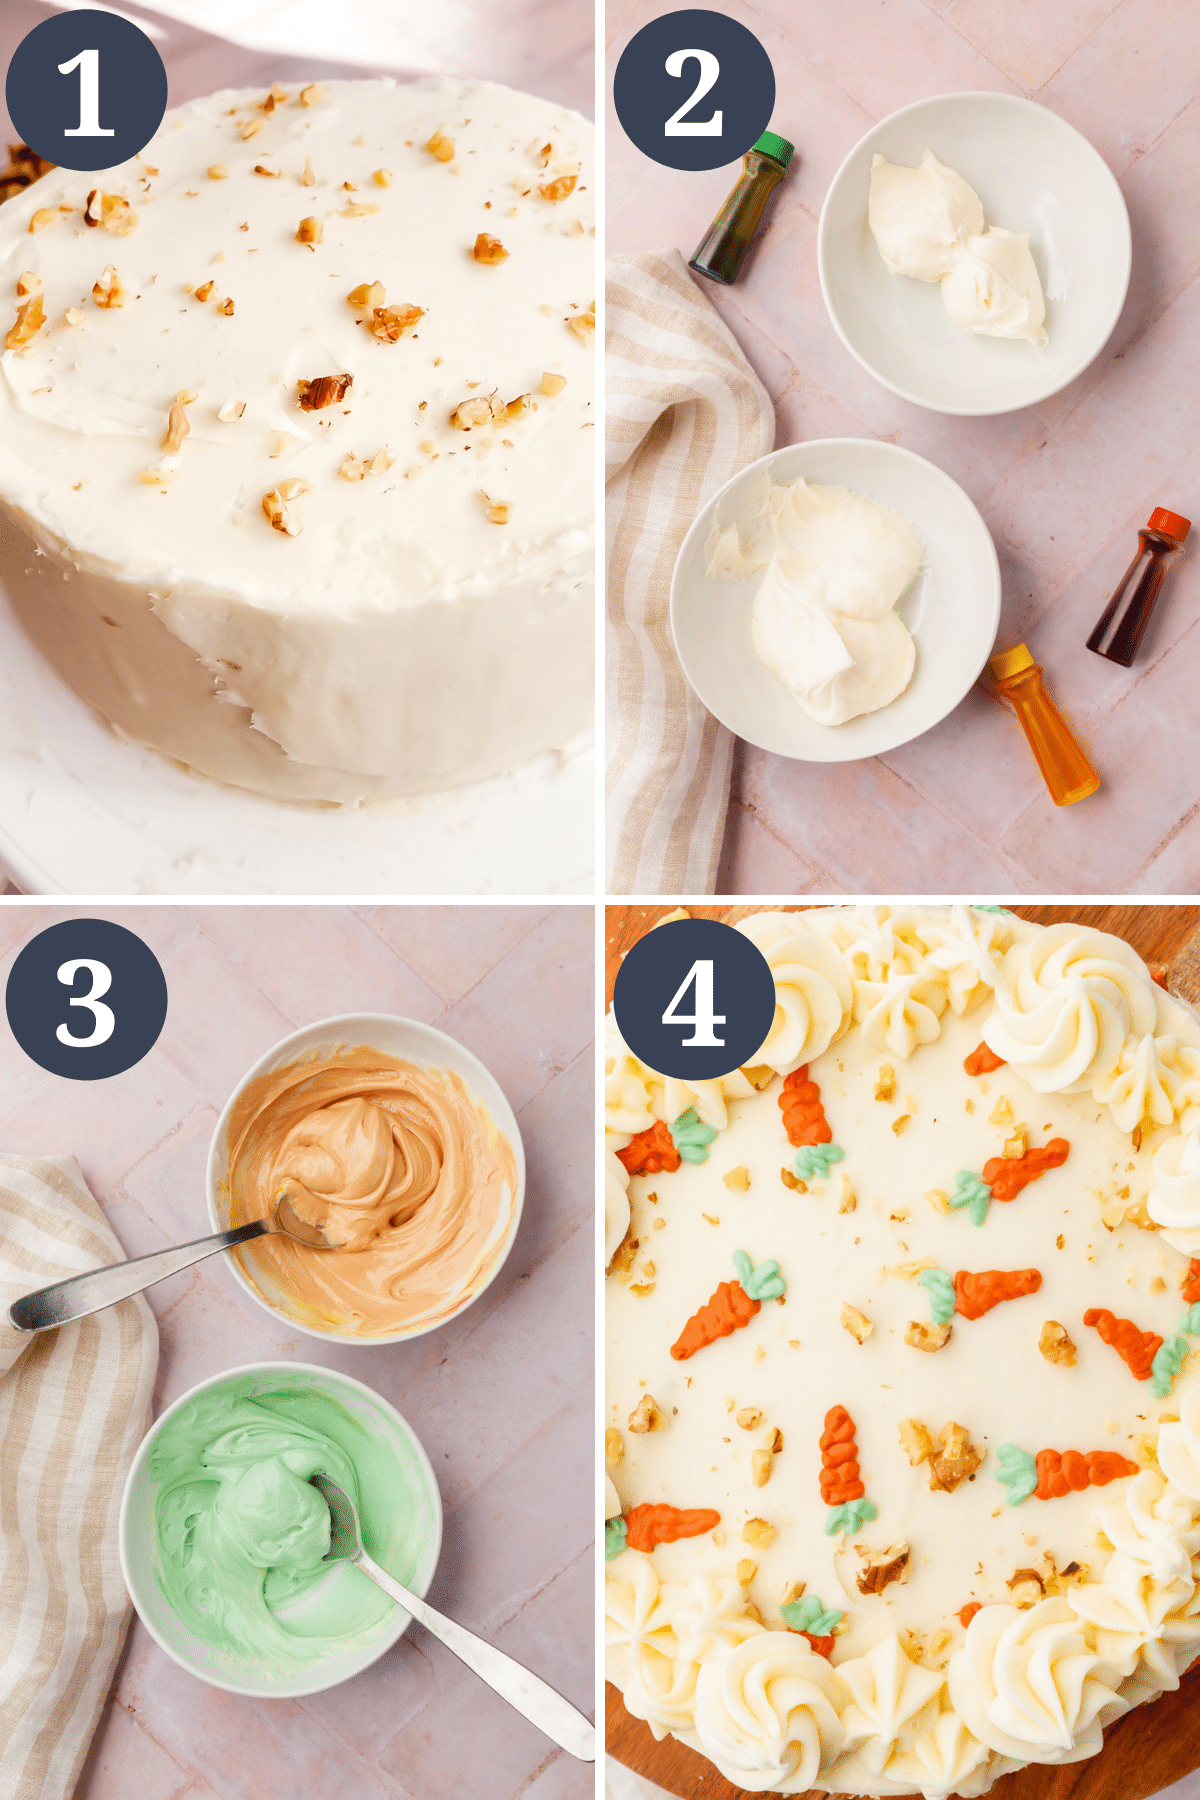 A collage showing the process of decorating carrot cake, from topping with chopped walnuts, dying the frosting orange and green, to piping mini carrots all over the cake. 